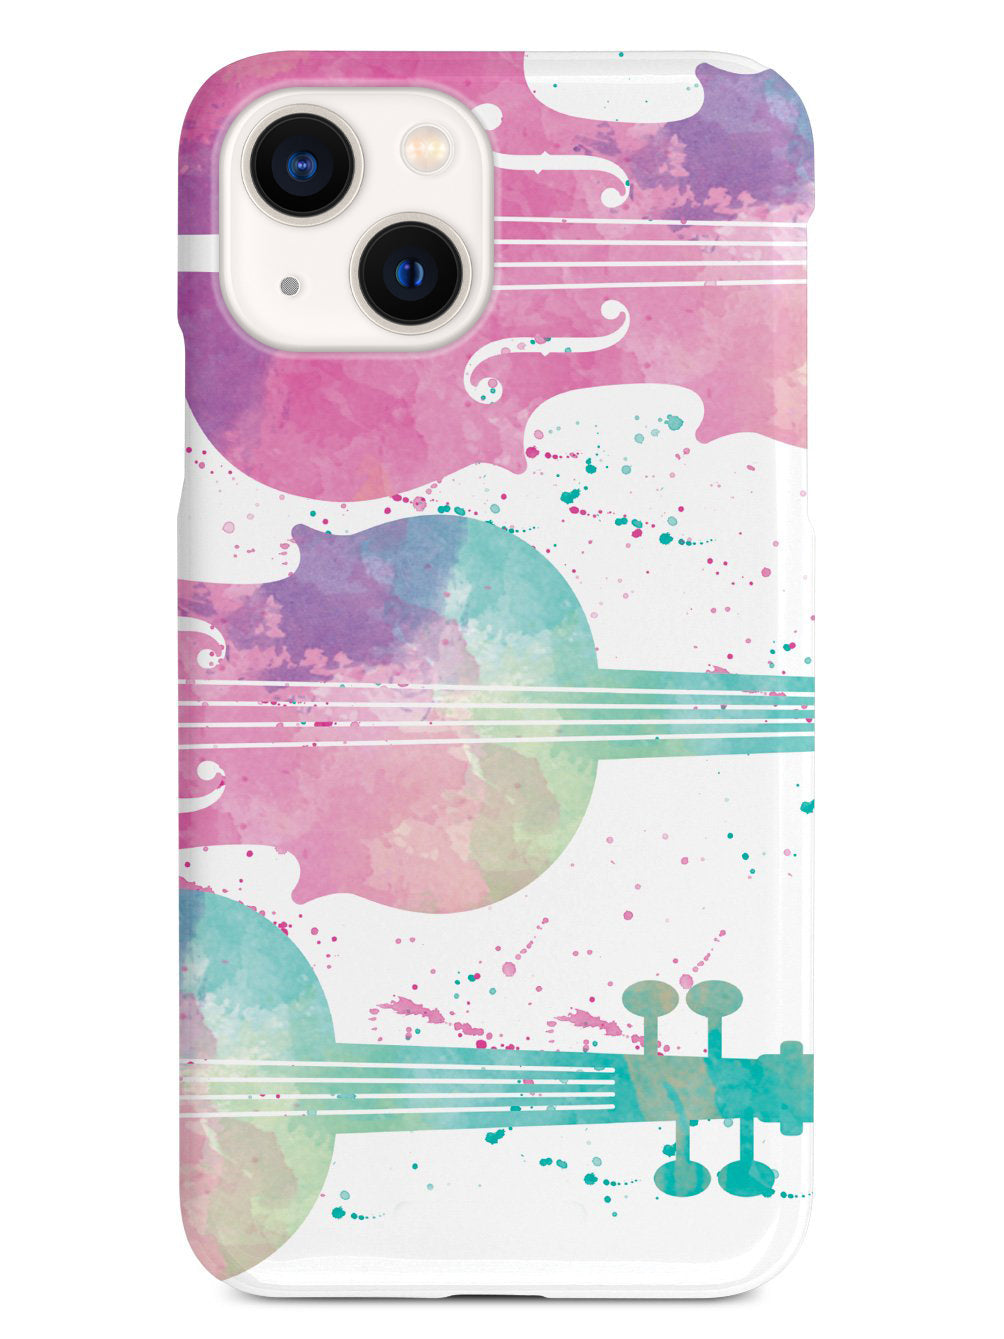 String Instrument Silhouette - Watercolor Case